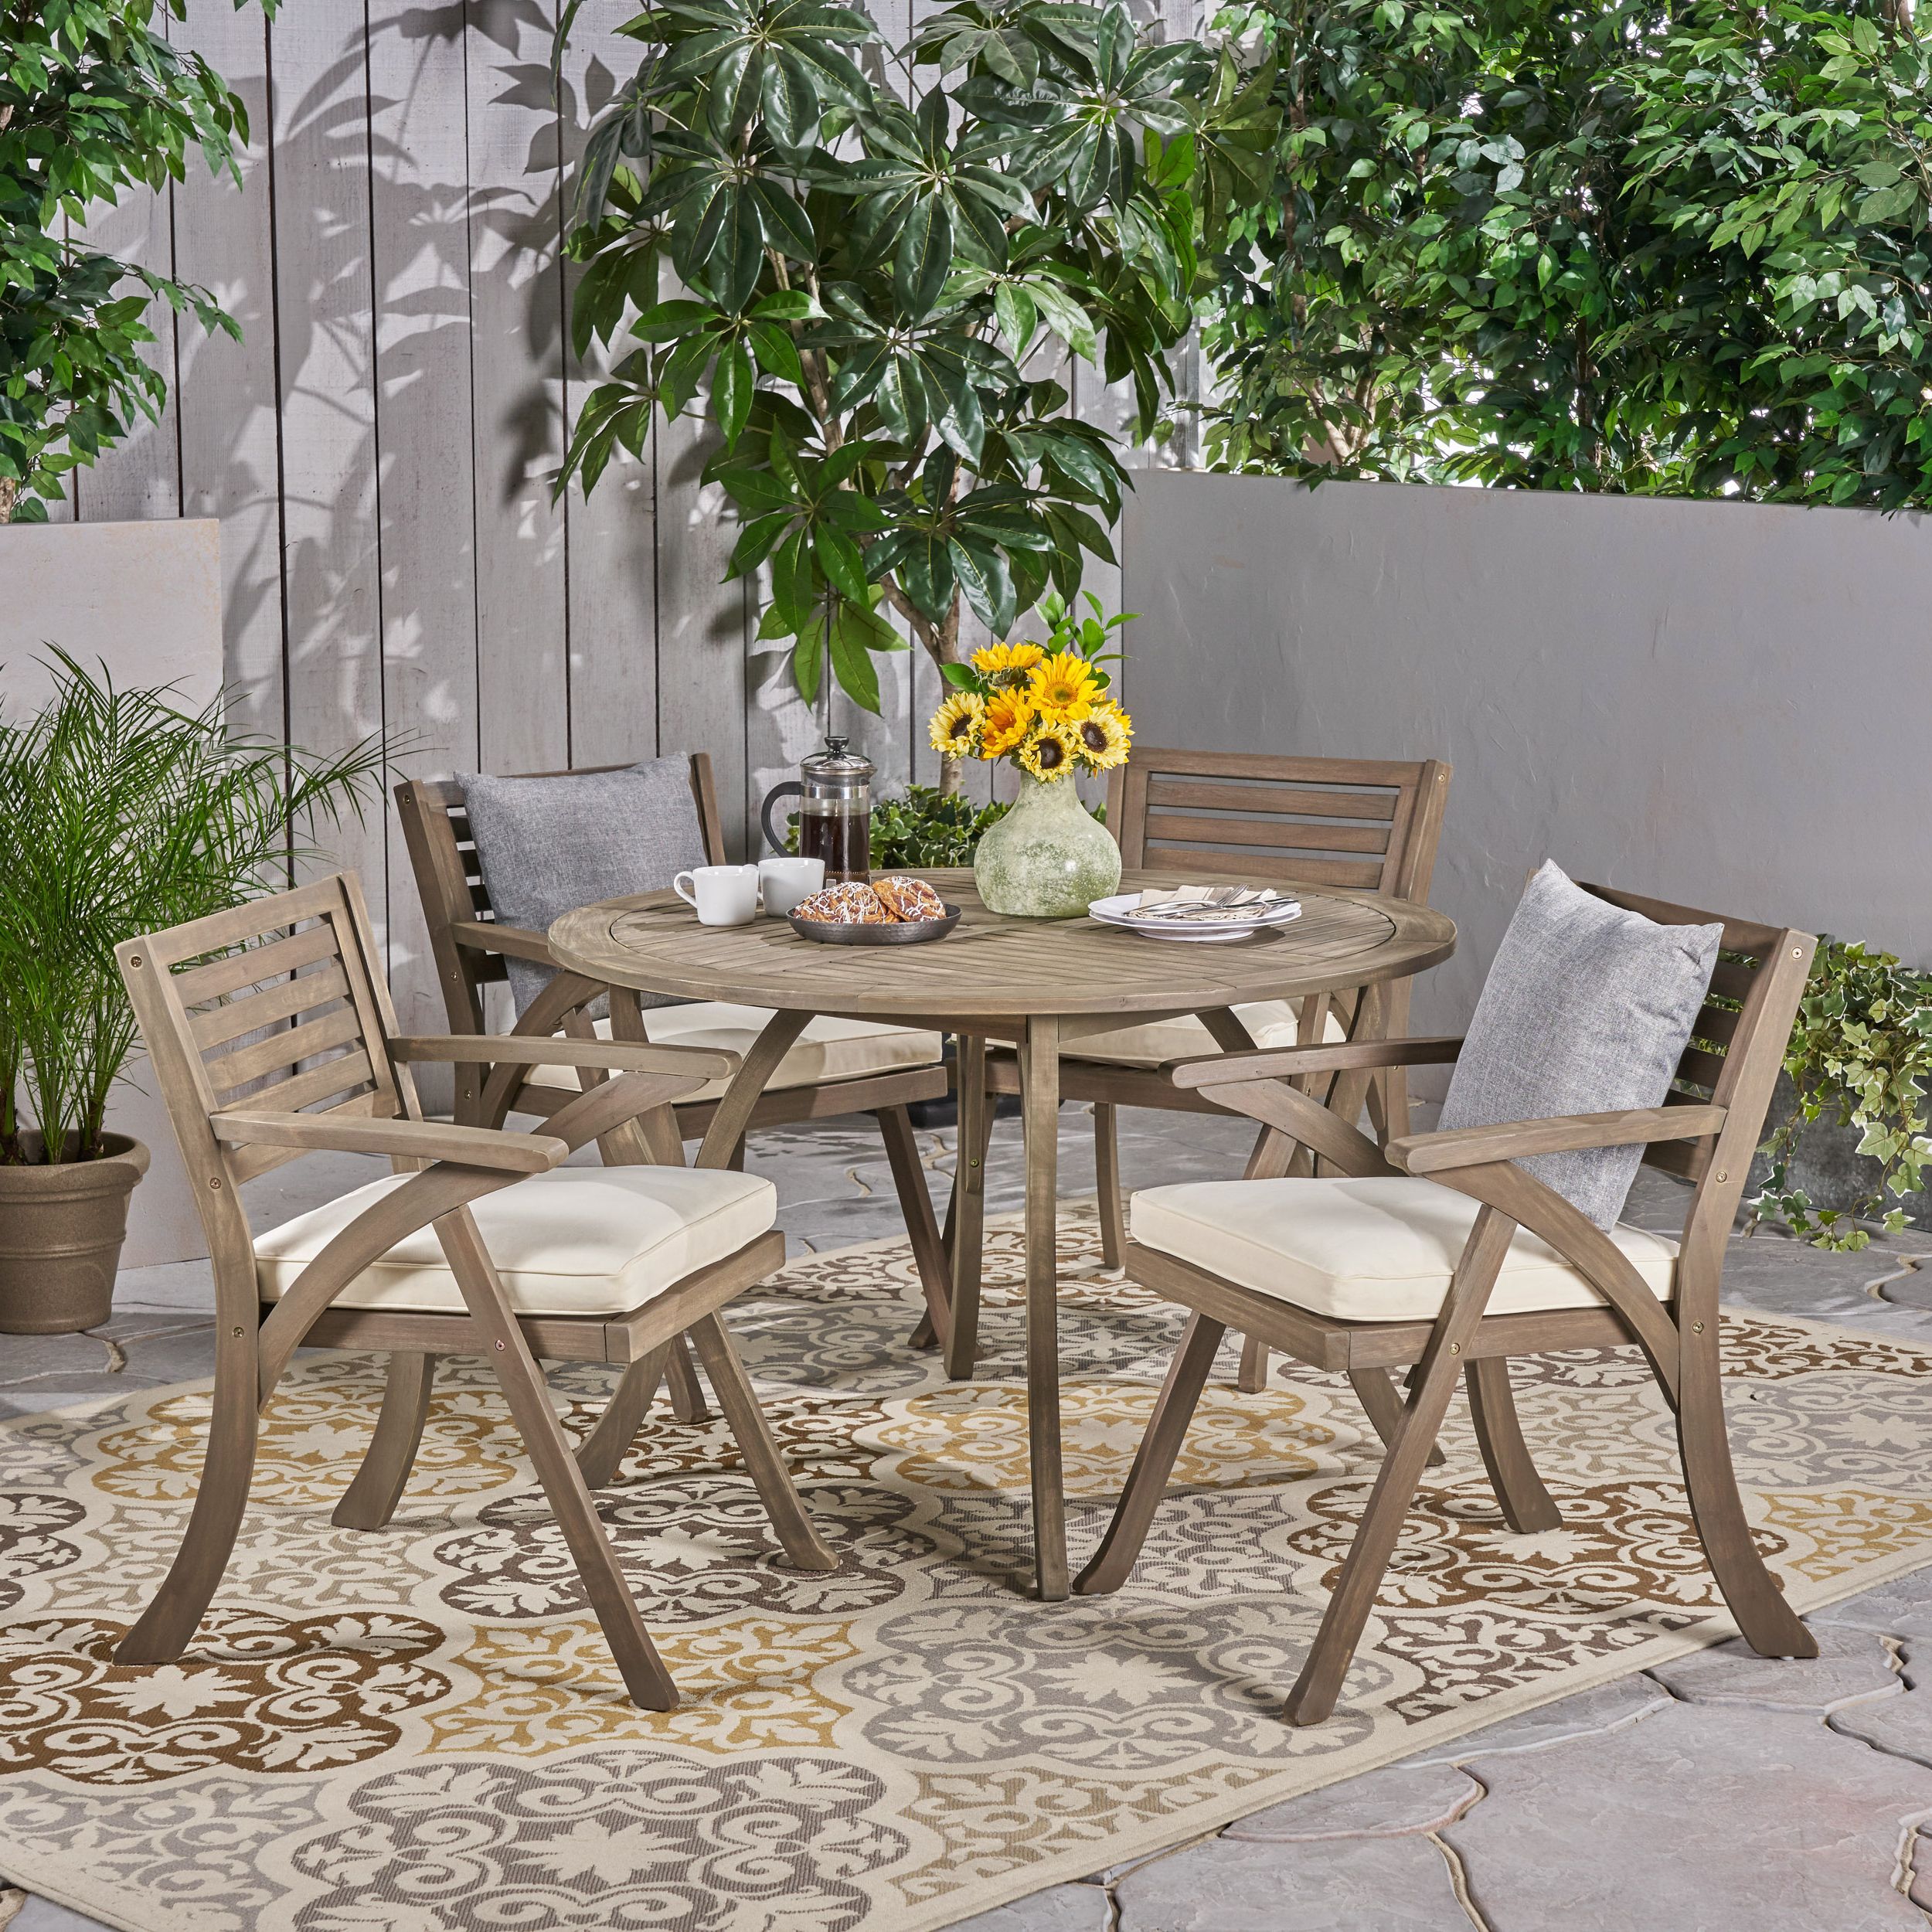 Well Liked Jordy Outdoor 5 Piece Acacia Wood Dining Set With Round Table, Gray Inside Round 5 Piece Outdoor Dining Set (View 2 of 15)